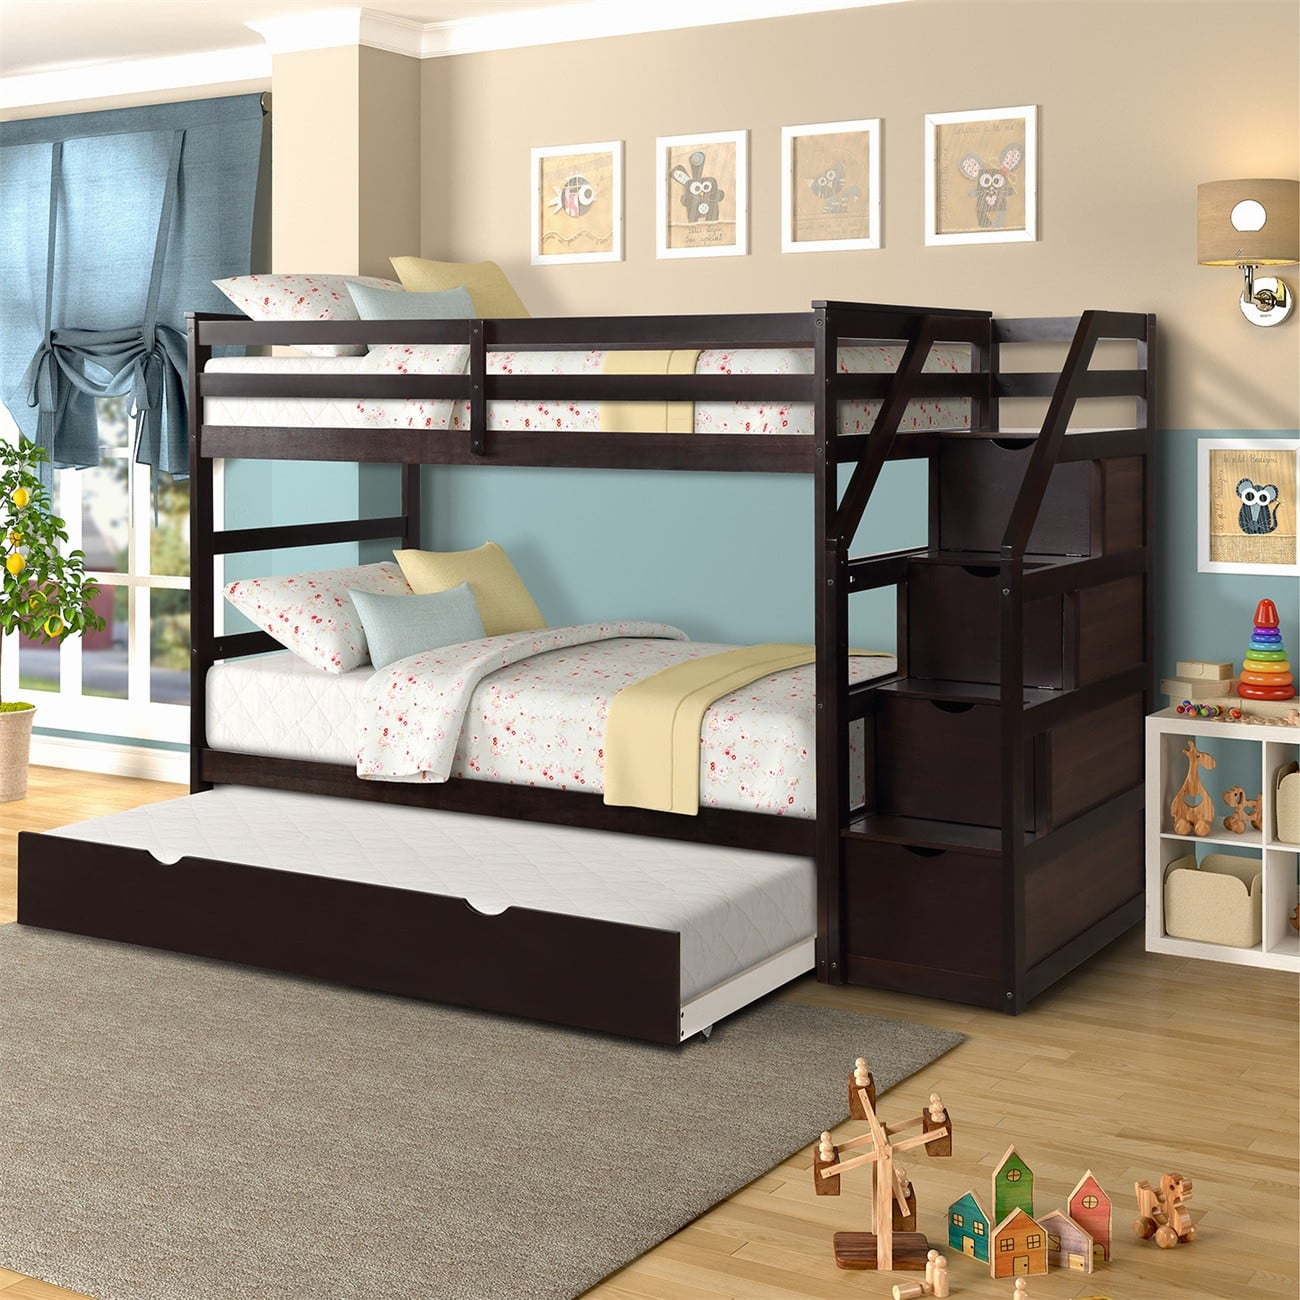 Modernluxe Twin Over Stair Bunk, Twin Over Full Bunk Bed With Storage Ladder